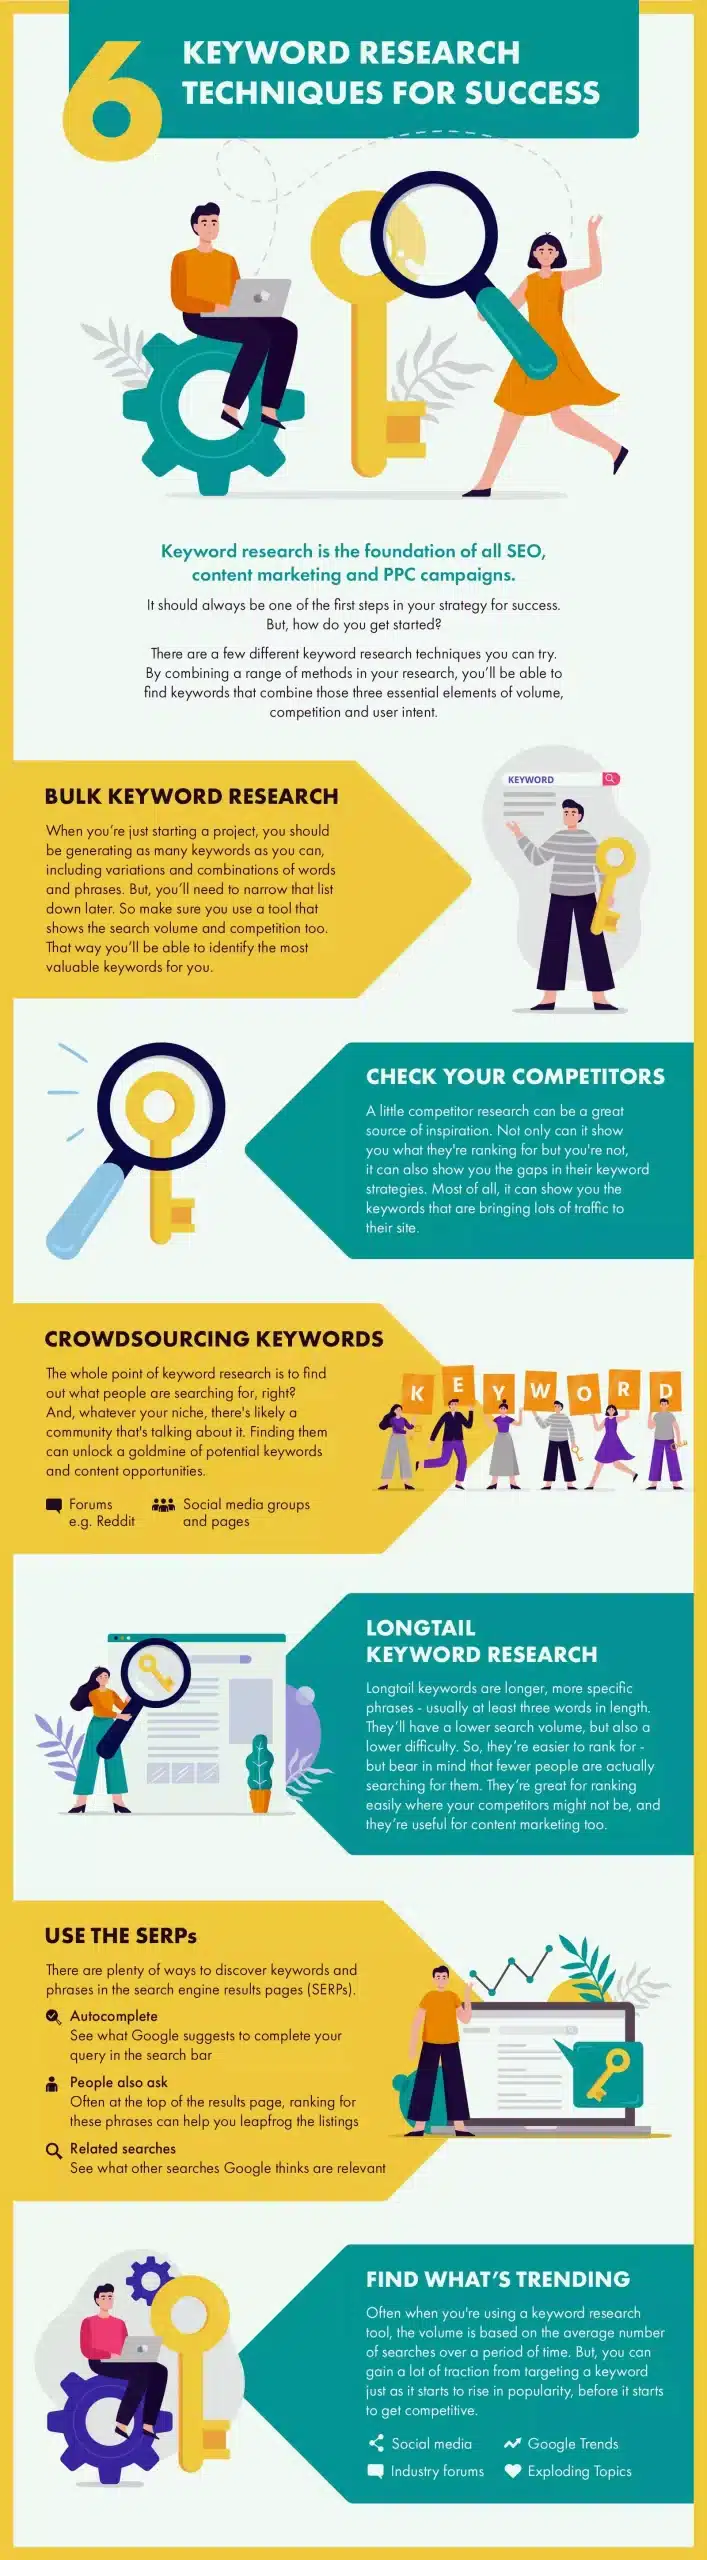 Keyword Research Infographic - Branding Centres